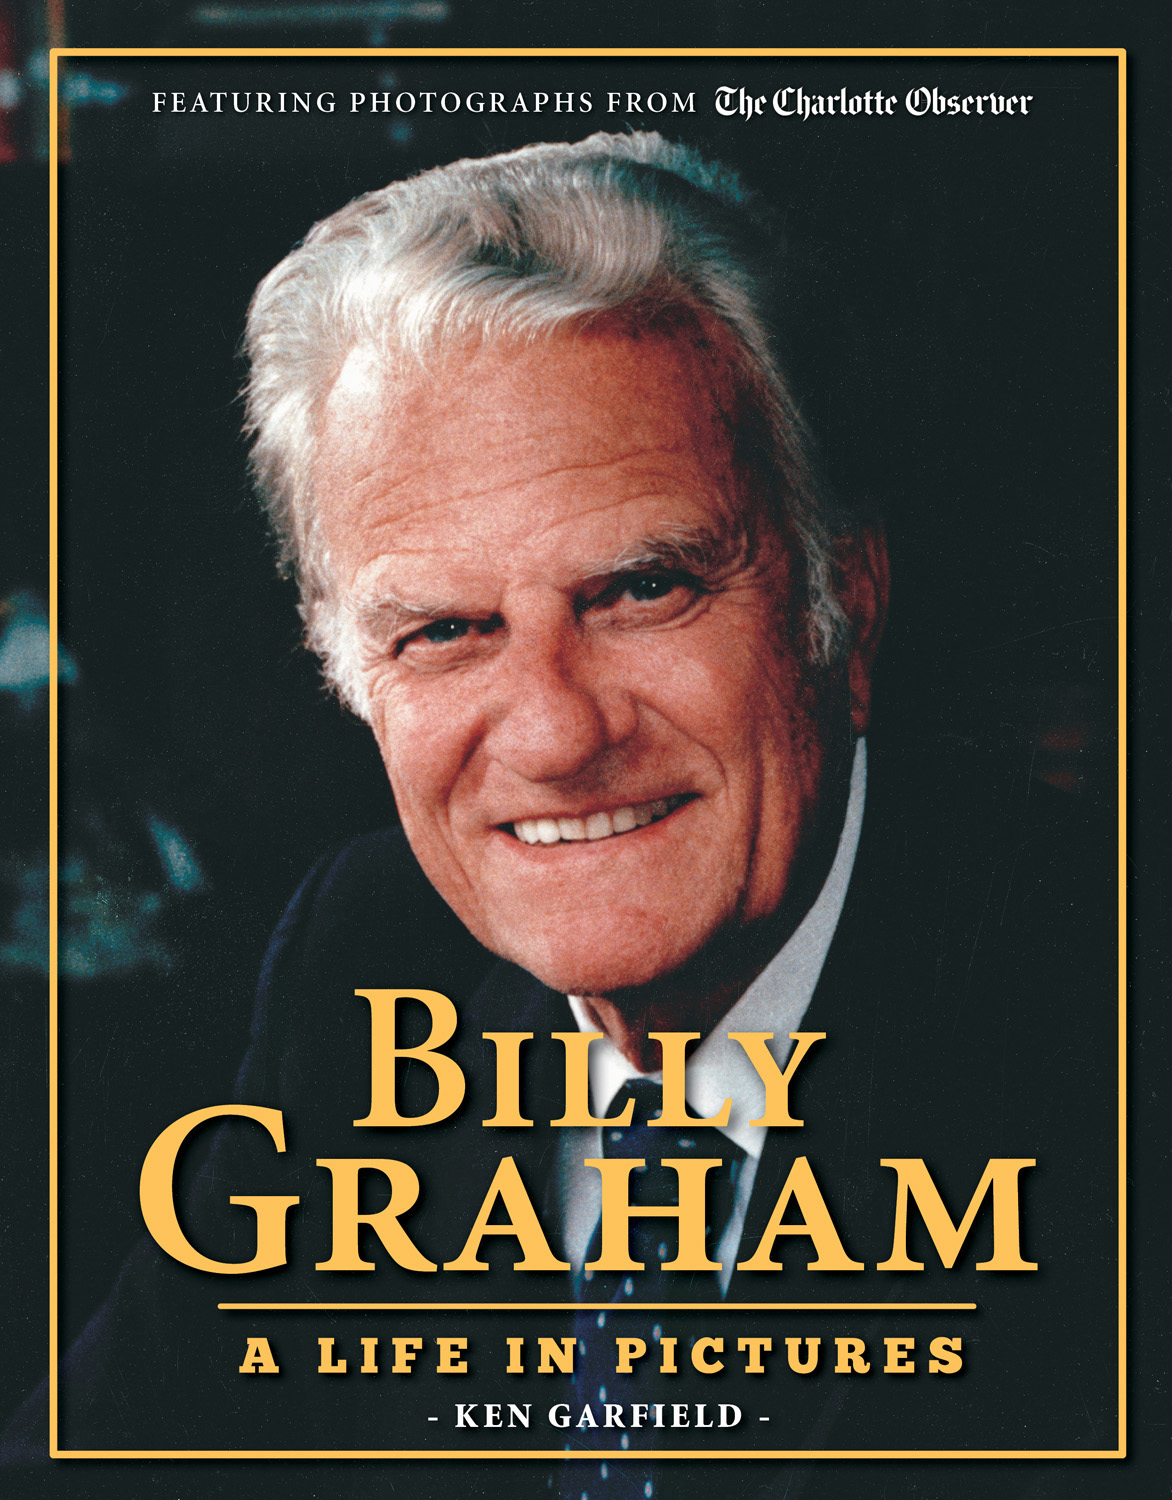 Book cover of “Billy Graham: A Life in Pictures” by Ken Garfield. Graham is the director of communications at Myers Park United Methodist Church in Charlotte, N.C. Photo courtesy of Triumph Books. 